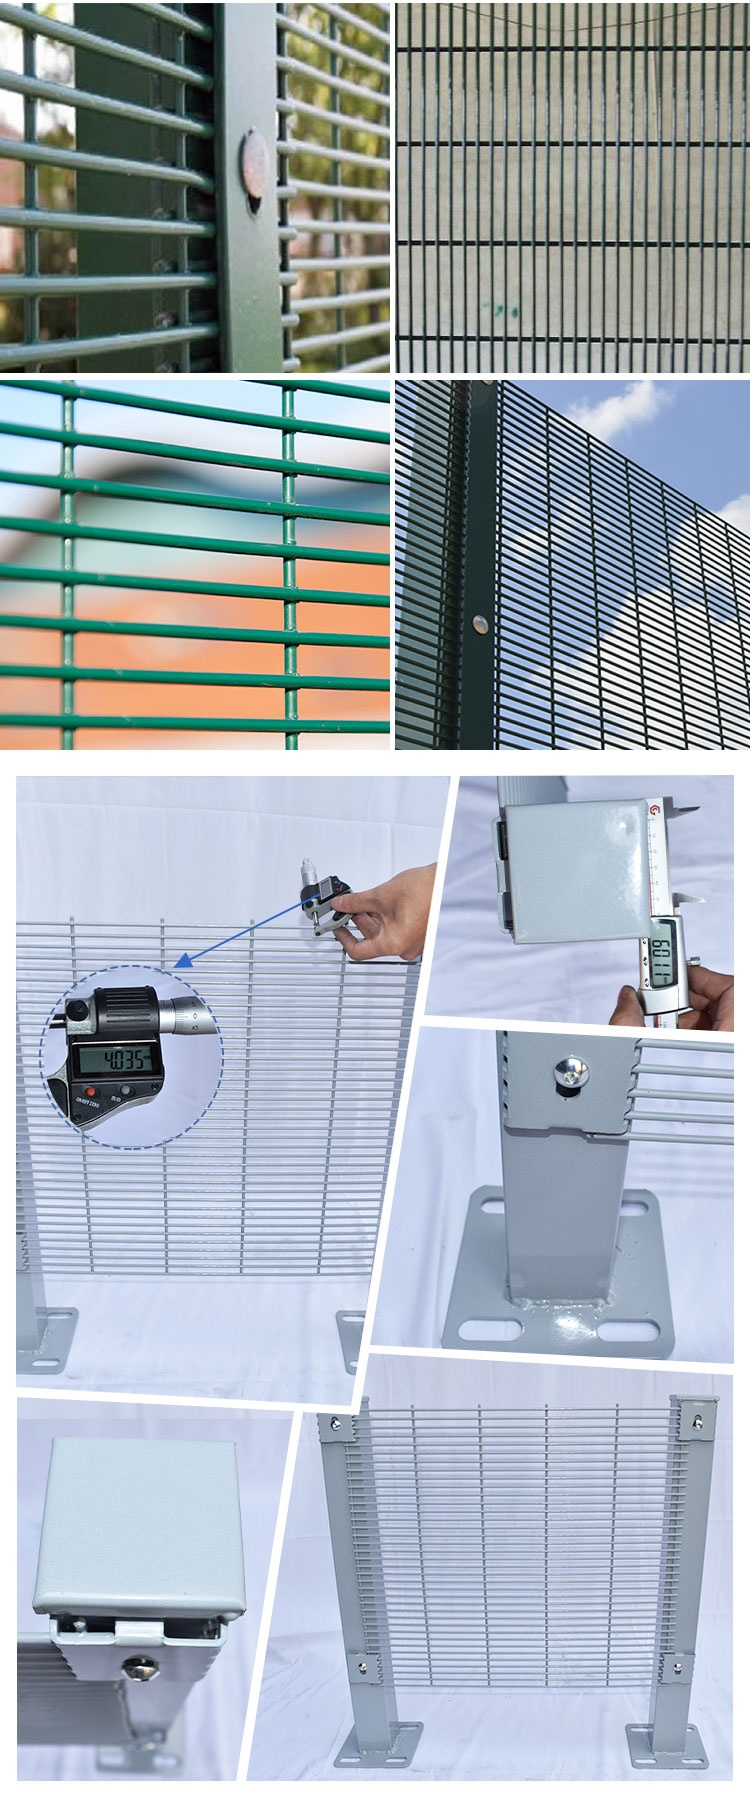 Anti-Climb Fence 4mm Wire High Security Clear Vu Fence 3